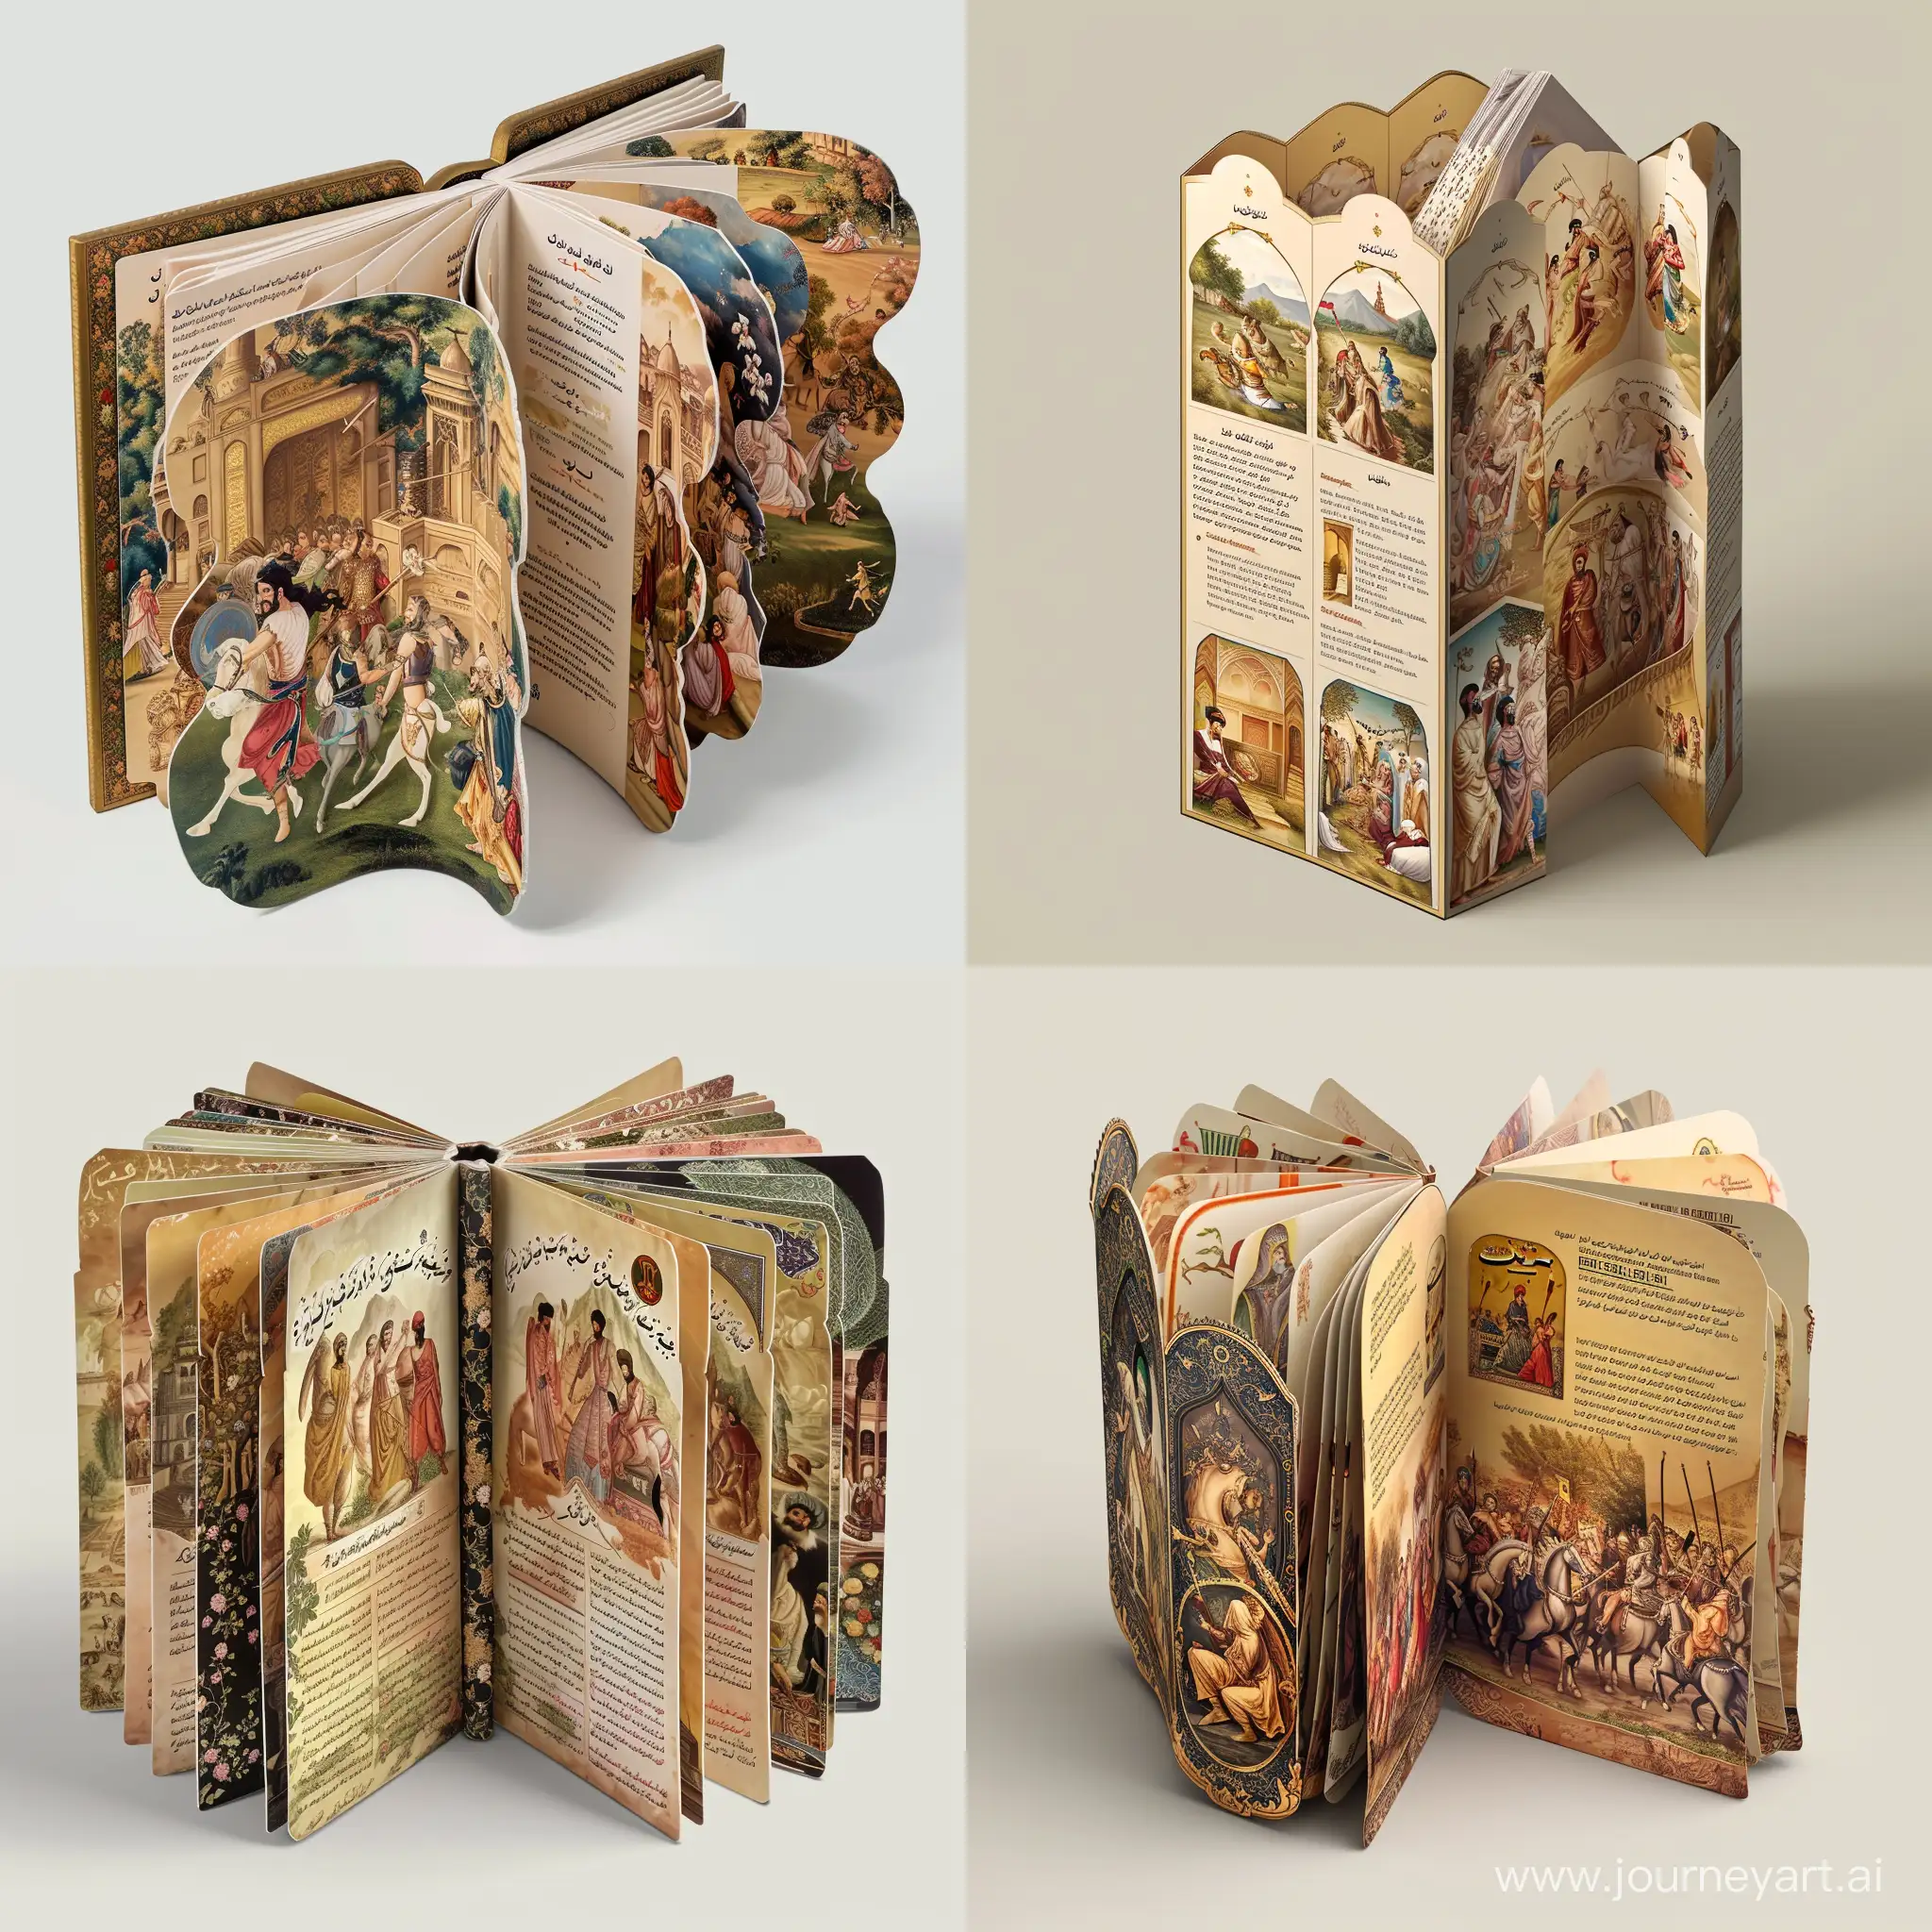 Imagine a book-shaped sustainable packaging with a cover that features a scene from Ferdowsi’s Shahnameh for traiditional persian ice cream, such as the battle of Rostam and Sohrab, or the love story of Khosrow and Shirin, in realistic and detailed style, with a title and a logo that relate to the product name and the brand identity. The inside of the packaging has pages that contain information about the product, the ingredients, the history and culture of Iran, and the story depicted on the cover, in elegant and readable fonts. The packaging has a QR code that leads to an interactive website or app that allows the customers to read more stories from the Shahnameh, play games, or watch videos related to the product and the culture..realistic style